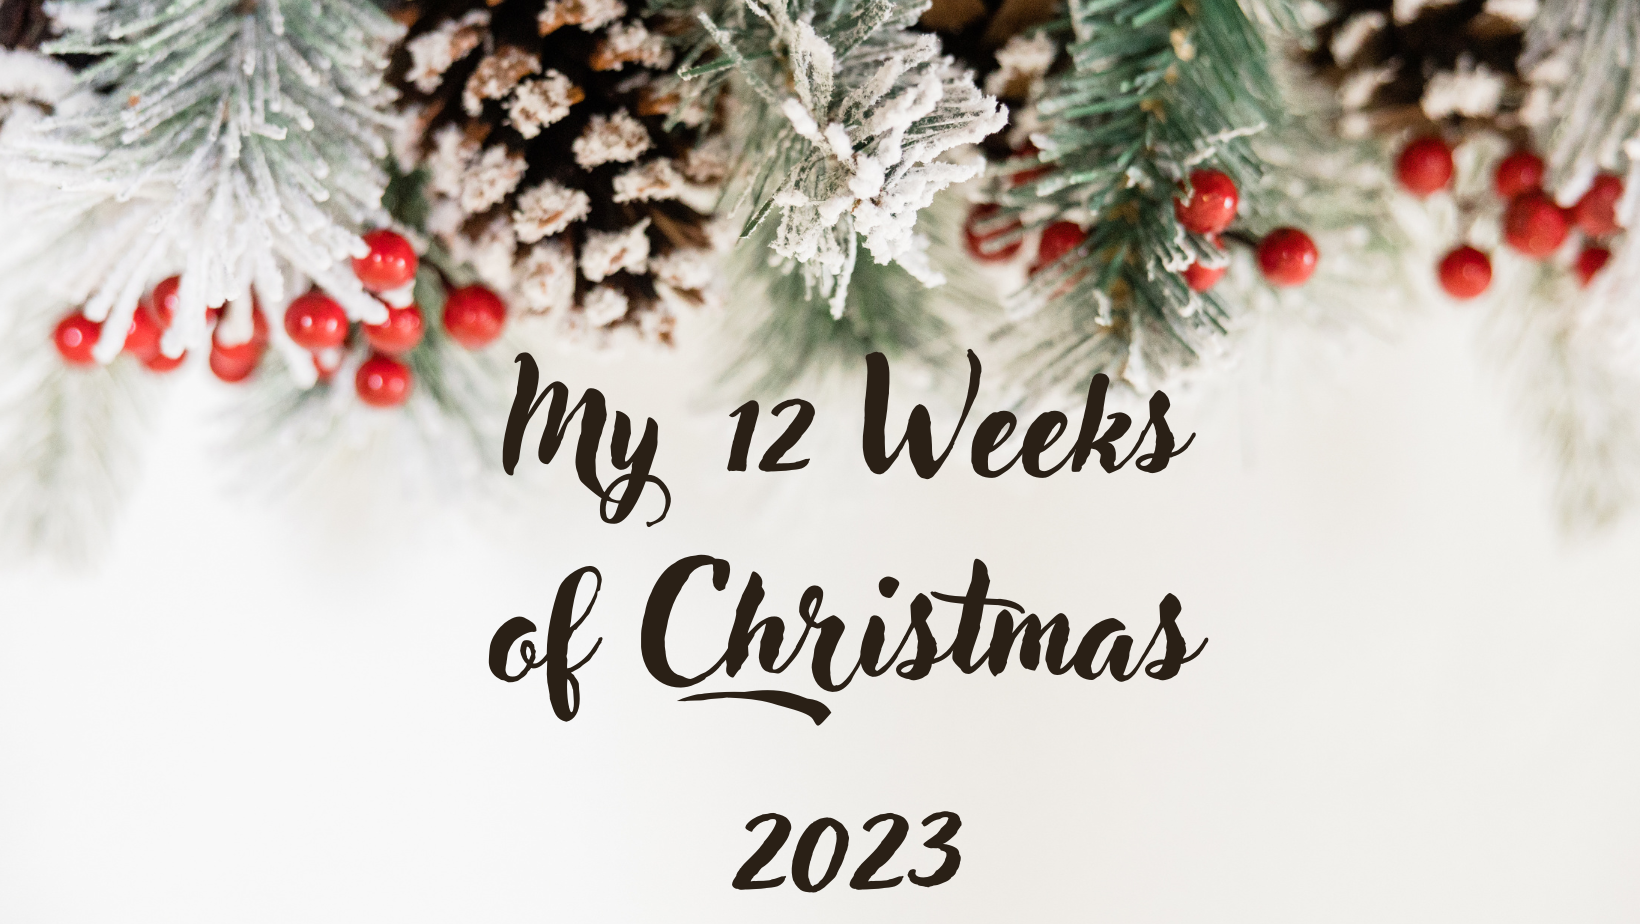 My 12 Weeks of Christmas is exclusive for my email subscribers